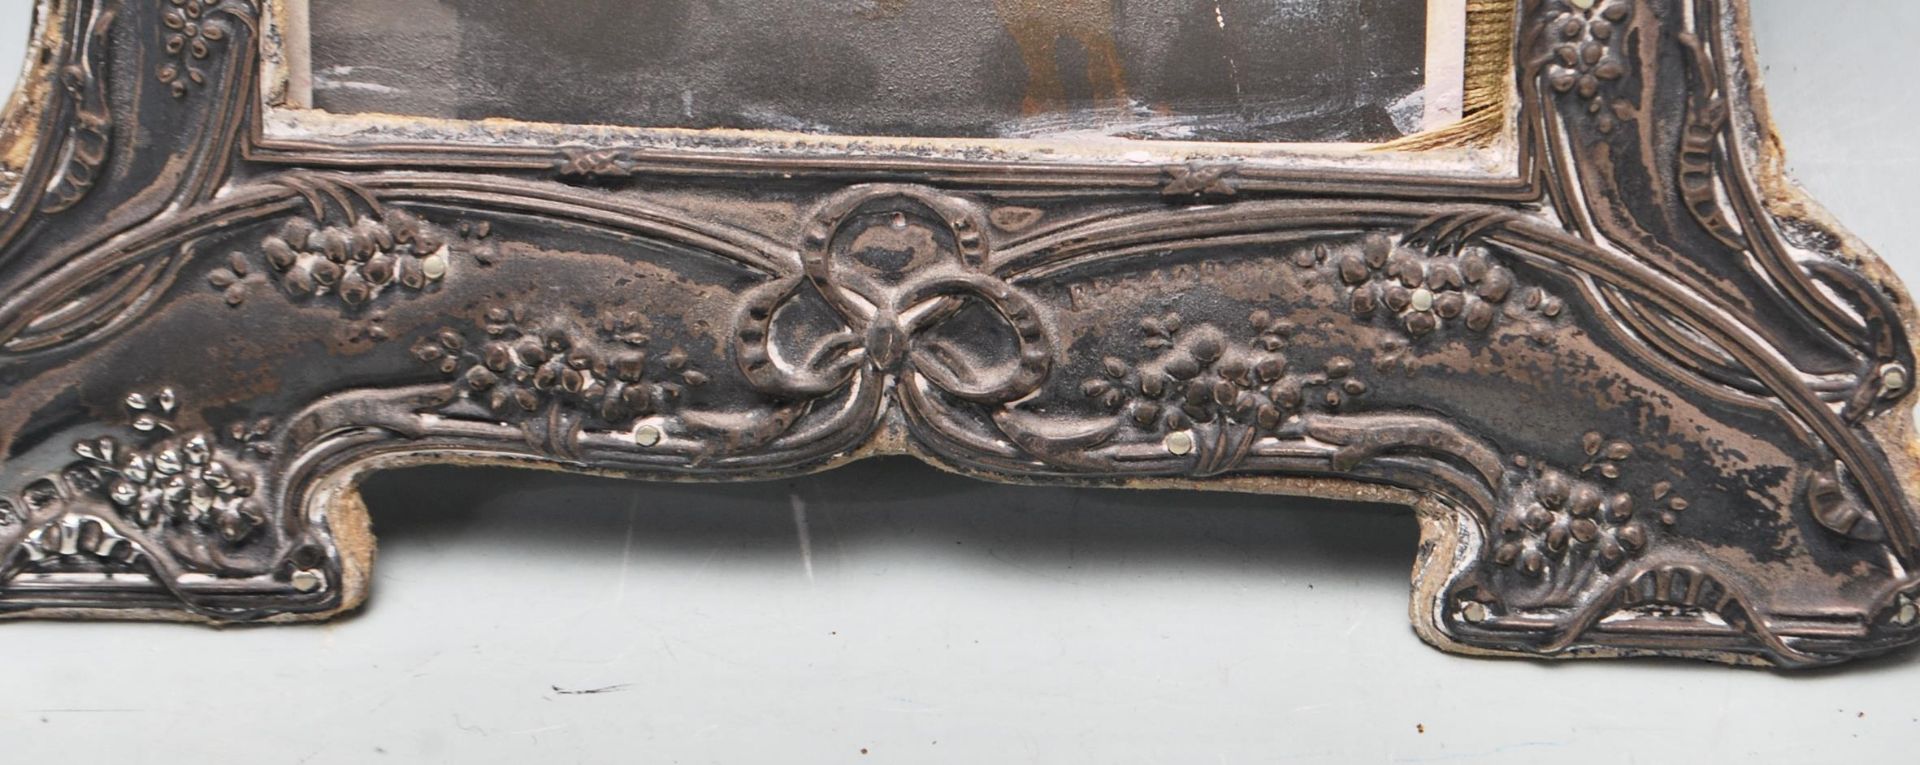 ANTIQUE EARLY 20TH CENTURY ART NOUVEAU PHOTO FRAME - Image 3 of 5